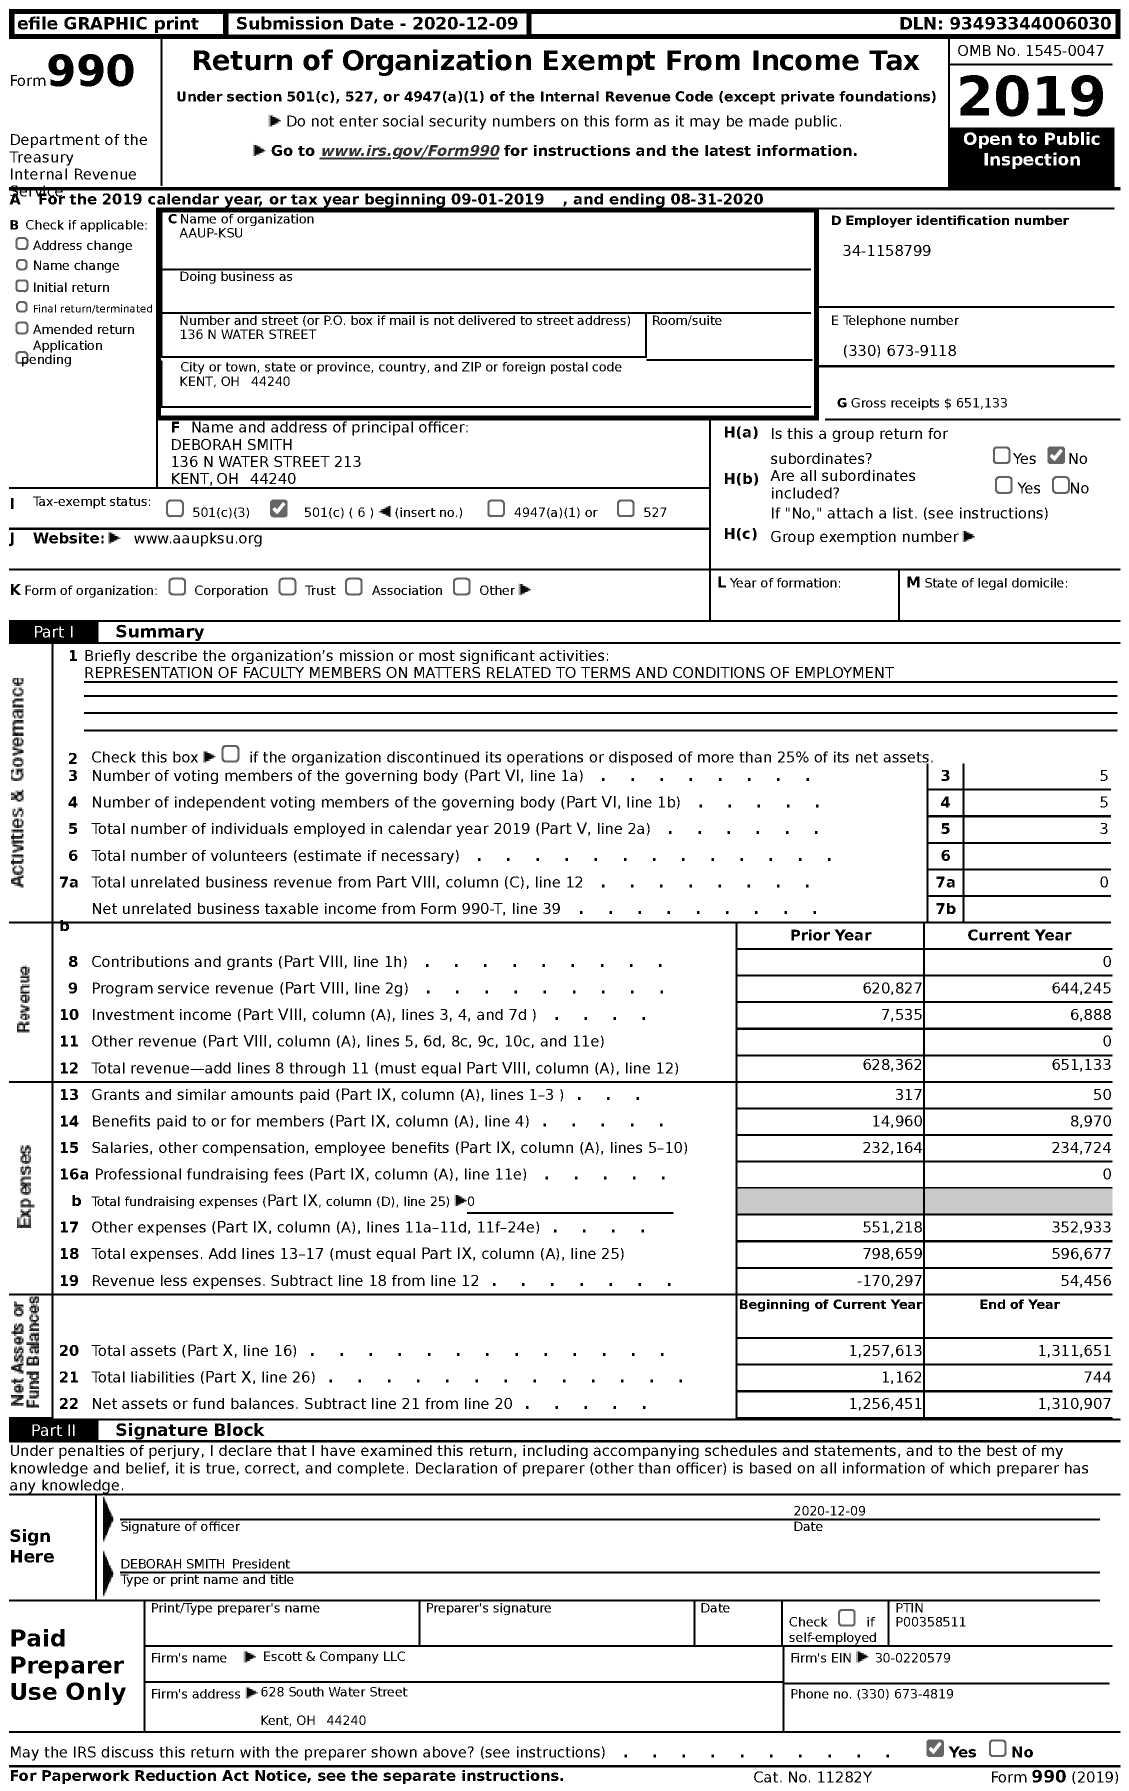 Image of first page of 2019 Form 990 for Aaup-Ksu